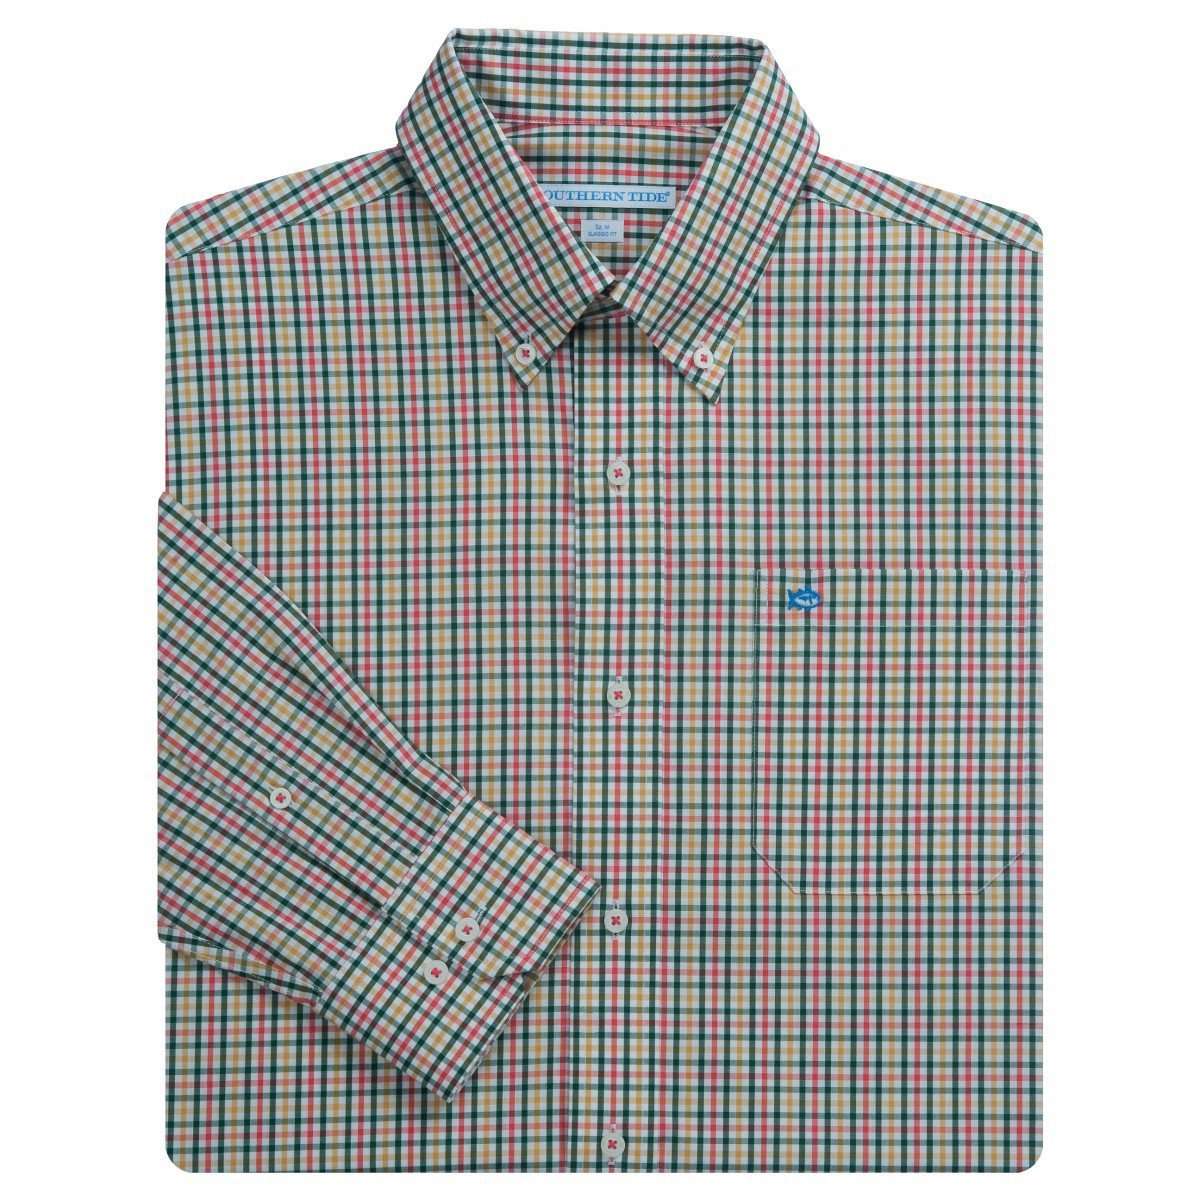 Plantation Plaid Sport Shirt in Grove by Southern Tide - Country Club Prep